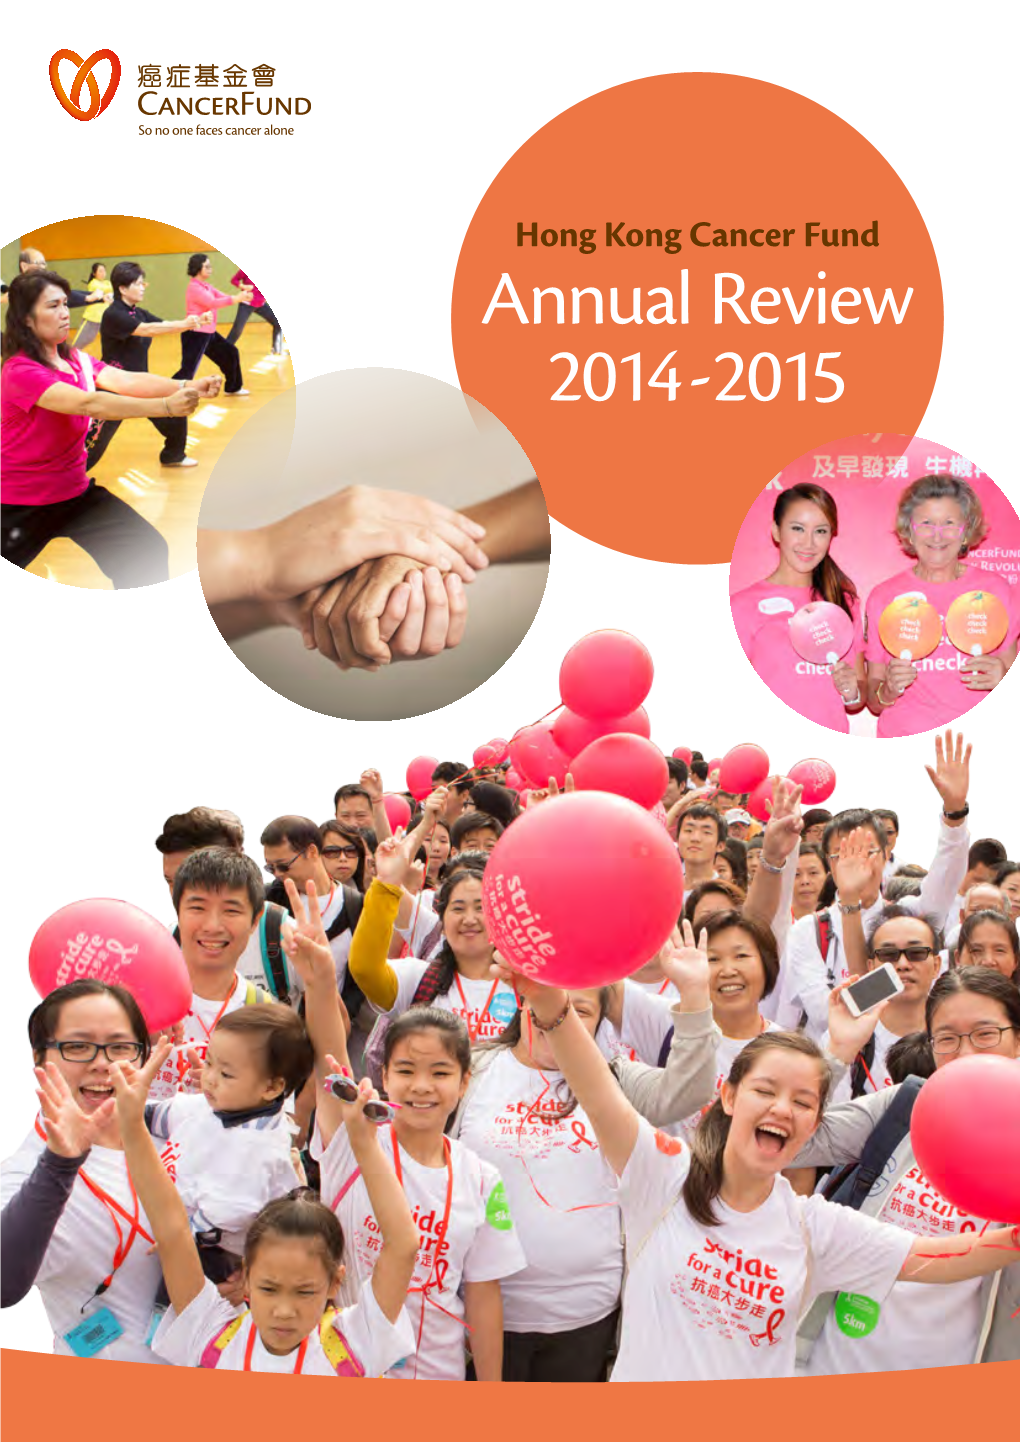 Hong Kong Cancer Fund Annual Review 2014-2015 Message from Our Founder & CEO